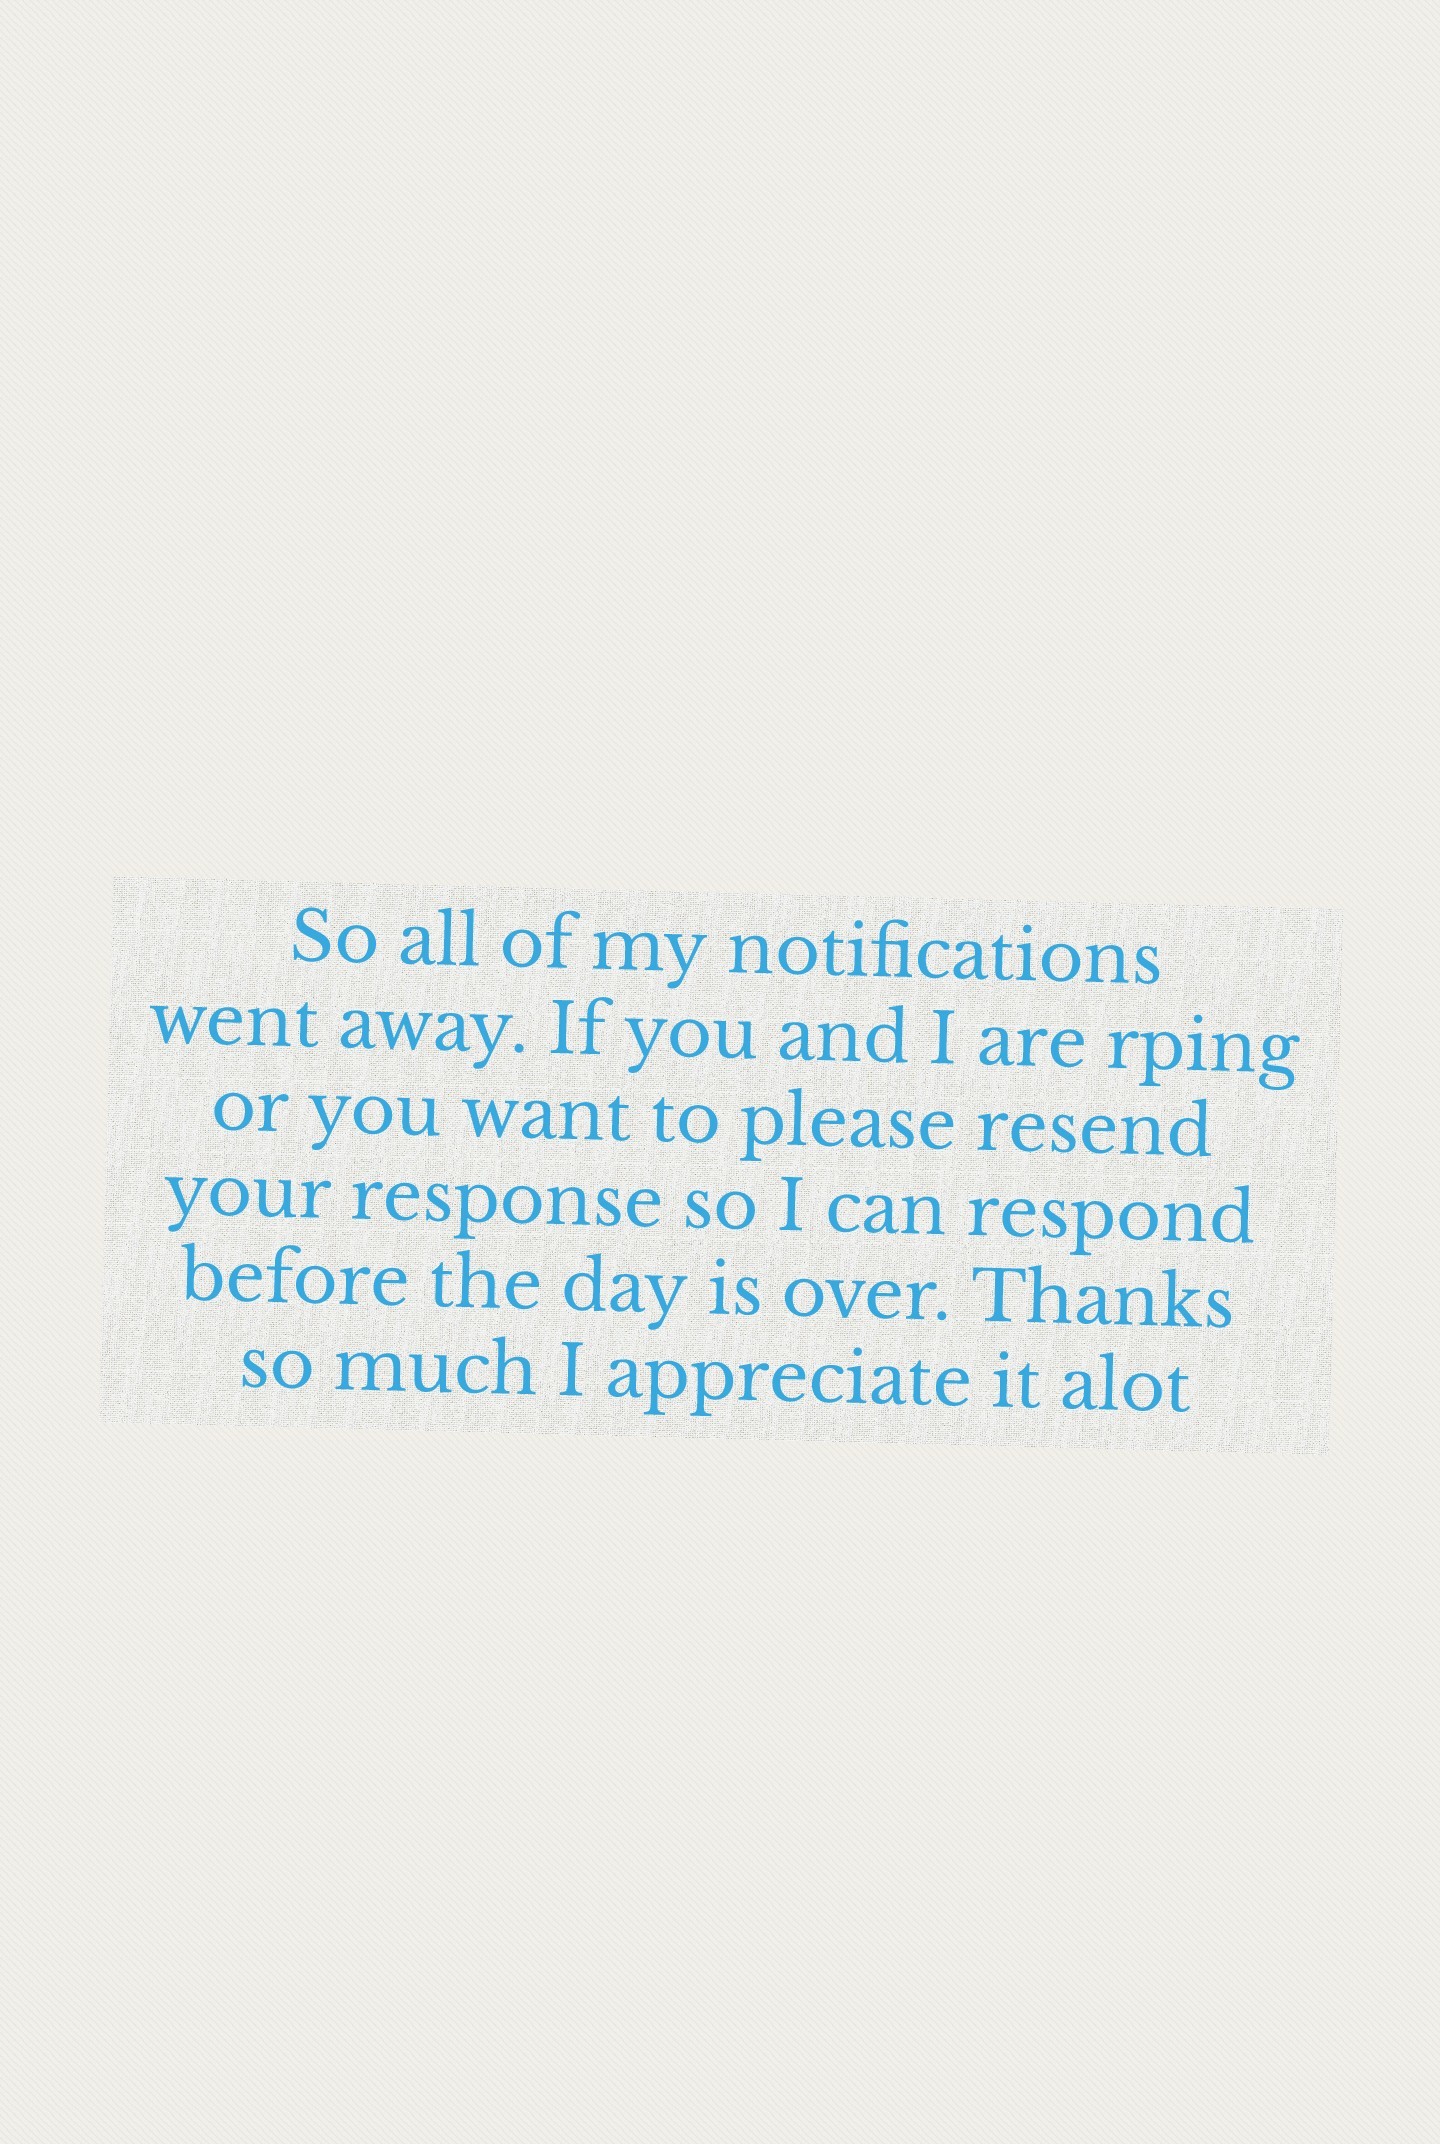 So all of my notifications
went away. If you and I are rping
or you want to please resend 
your response so I can respond 
before the day is over. Thanks 
so much I appreciate it alot